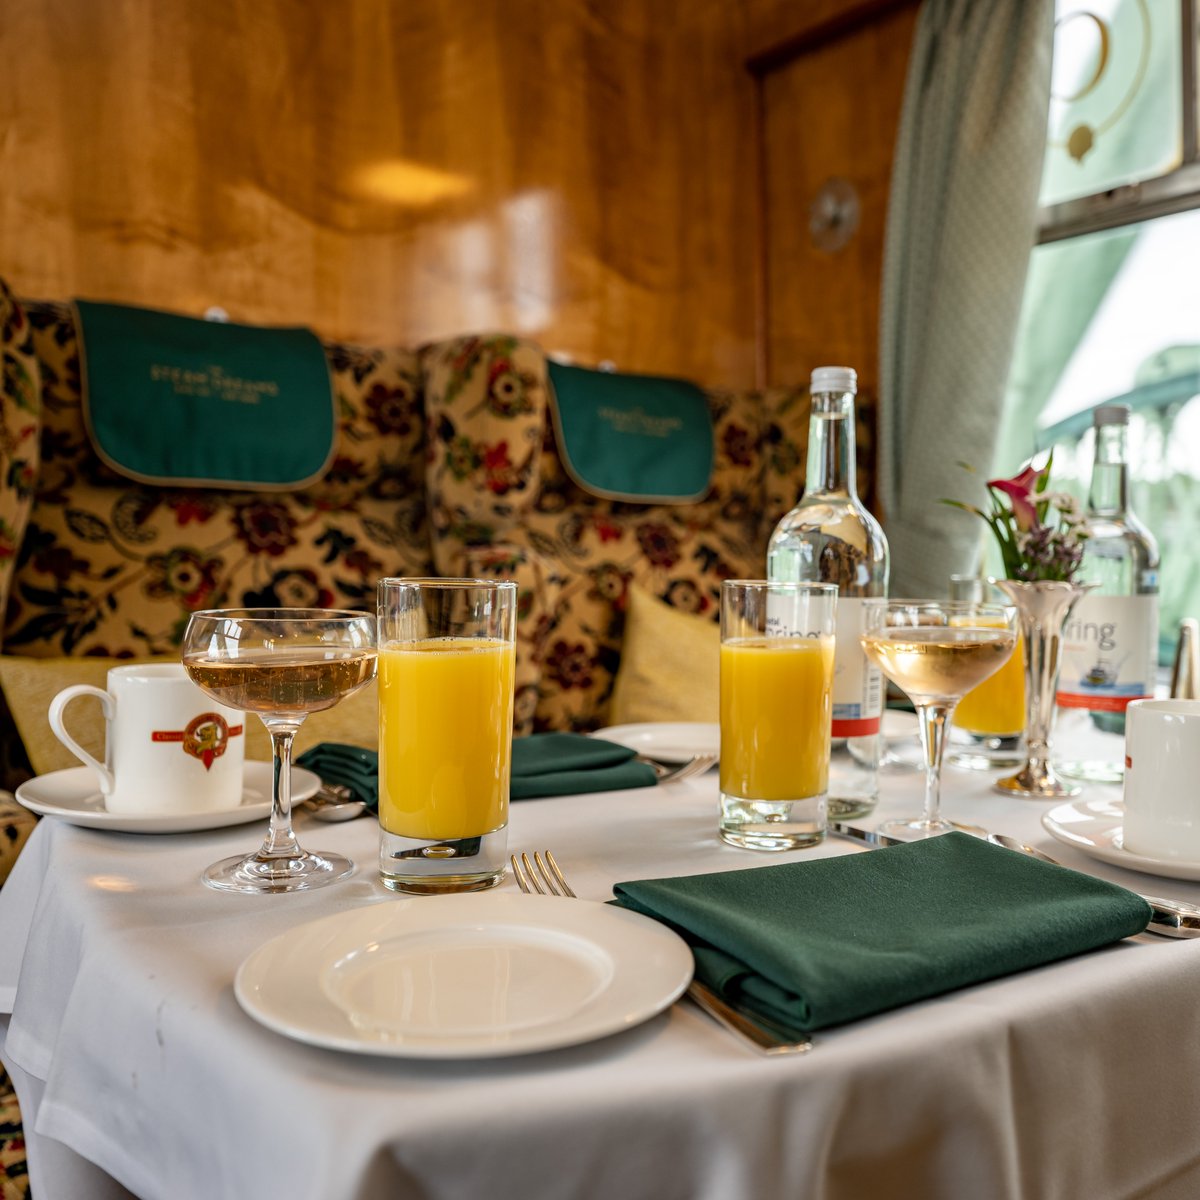 Sip Champagne and savour delightful patisseries amongst the serene setting of a beautifully restored carriage with our Sussex Coast Tour. 🍓🍰 Book tickets for Sunday, 8th September: bit.ly/3vJIrgL 📸 1: Colin Lee #steamdreams #daytrip #afternoontea #steamtrain